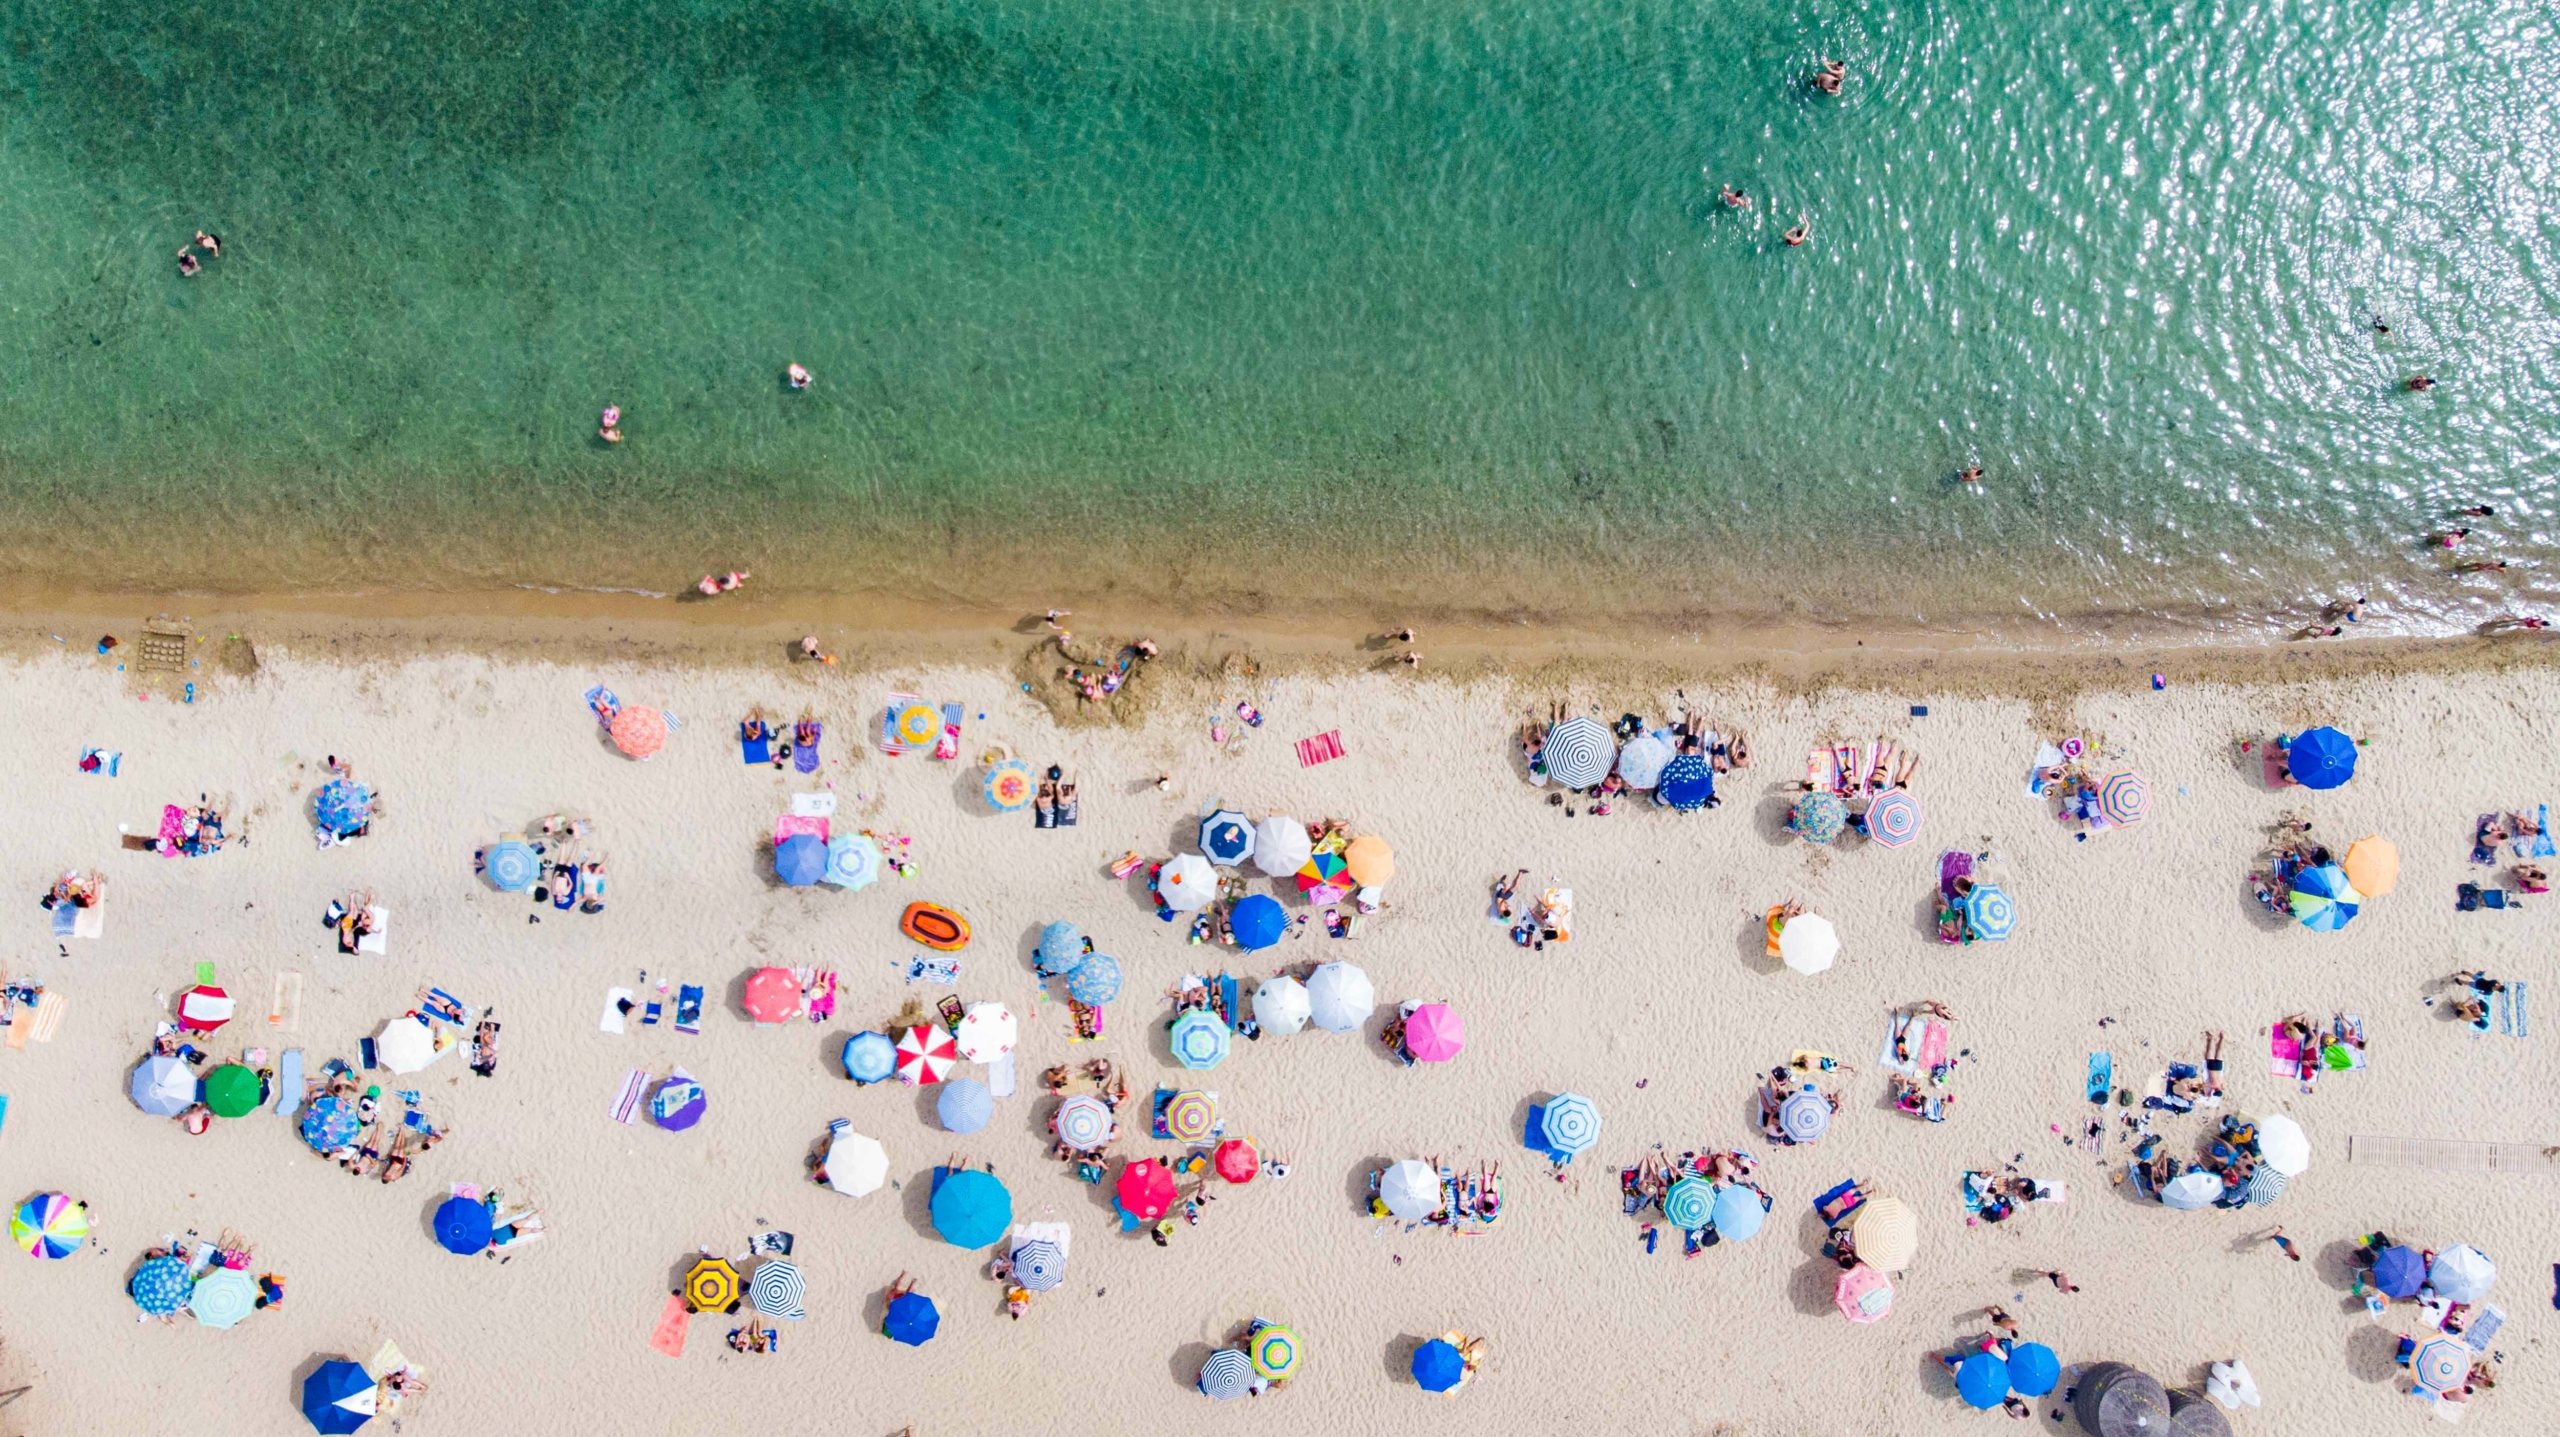 Drone View Of Crowded Beach During Covid-19 Easing Measures Era In Greece